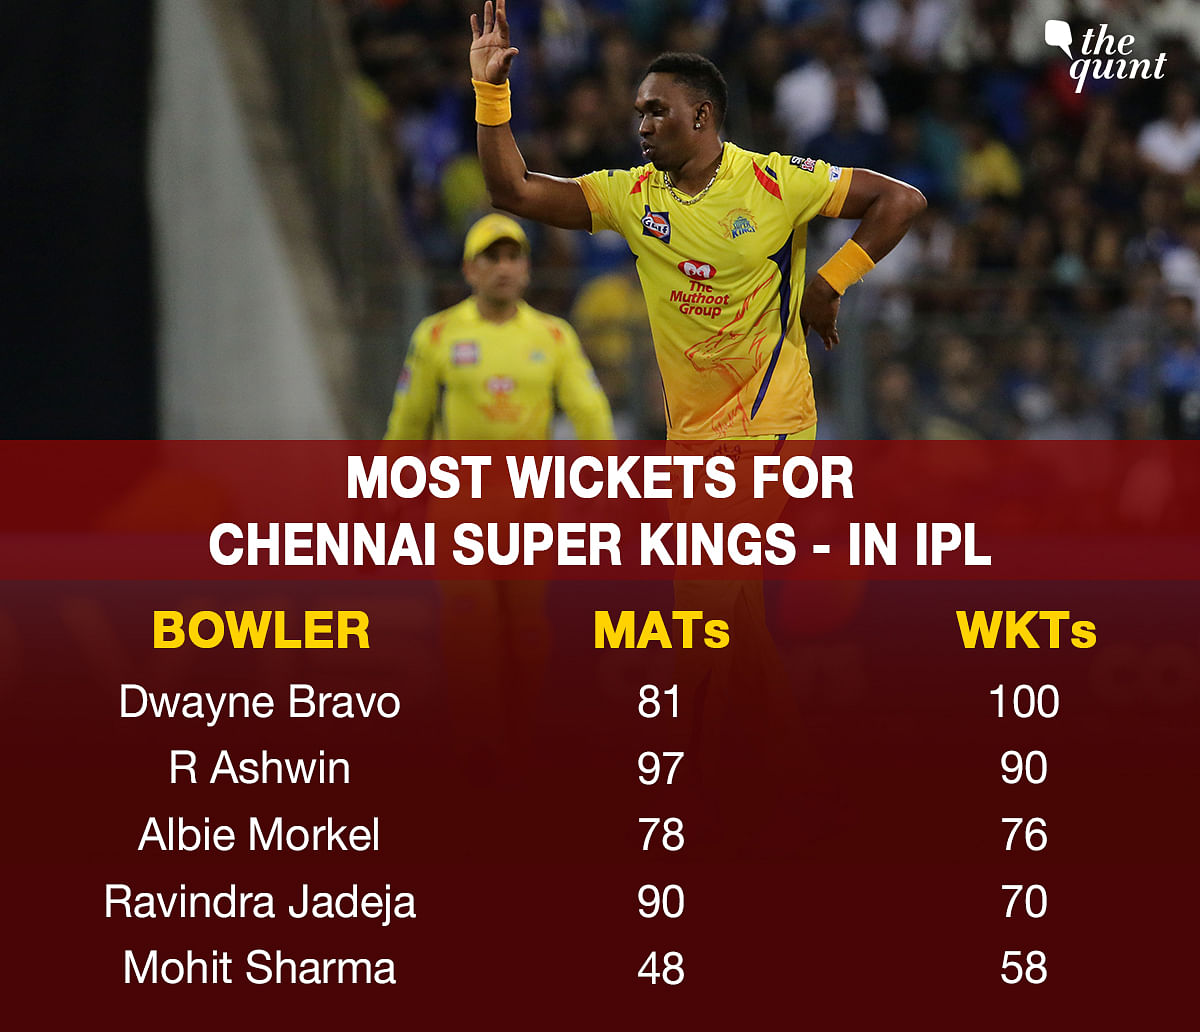 Dwayne Bravo became the first bowler to take 100 wickets for CSK in the IPL during the match against Mumbai Indians.